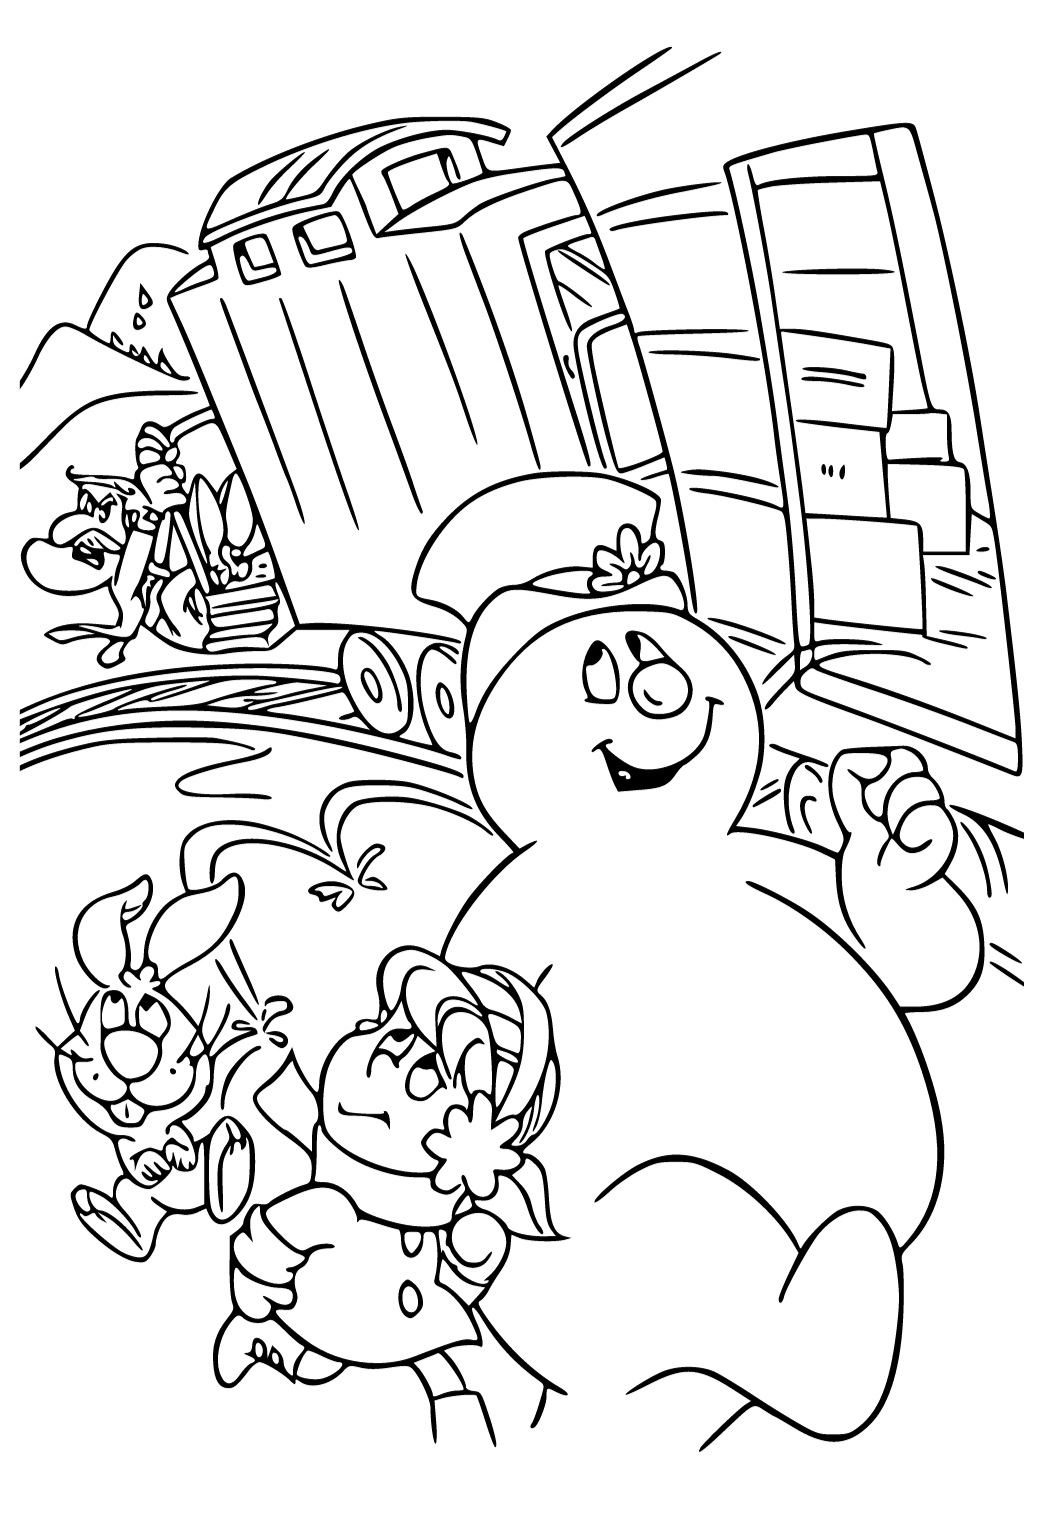 Free printable frosty the snowman train coloring page for adults and kids